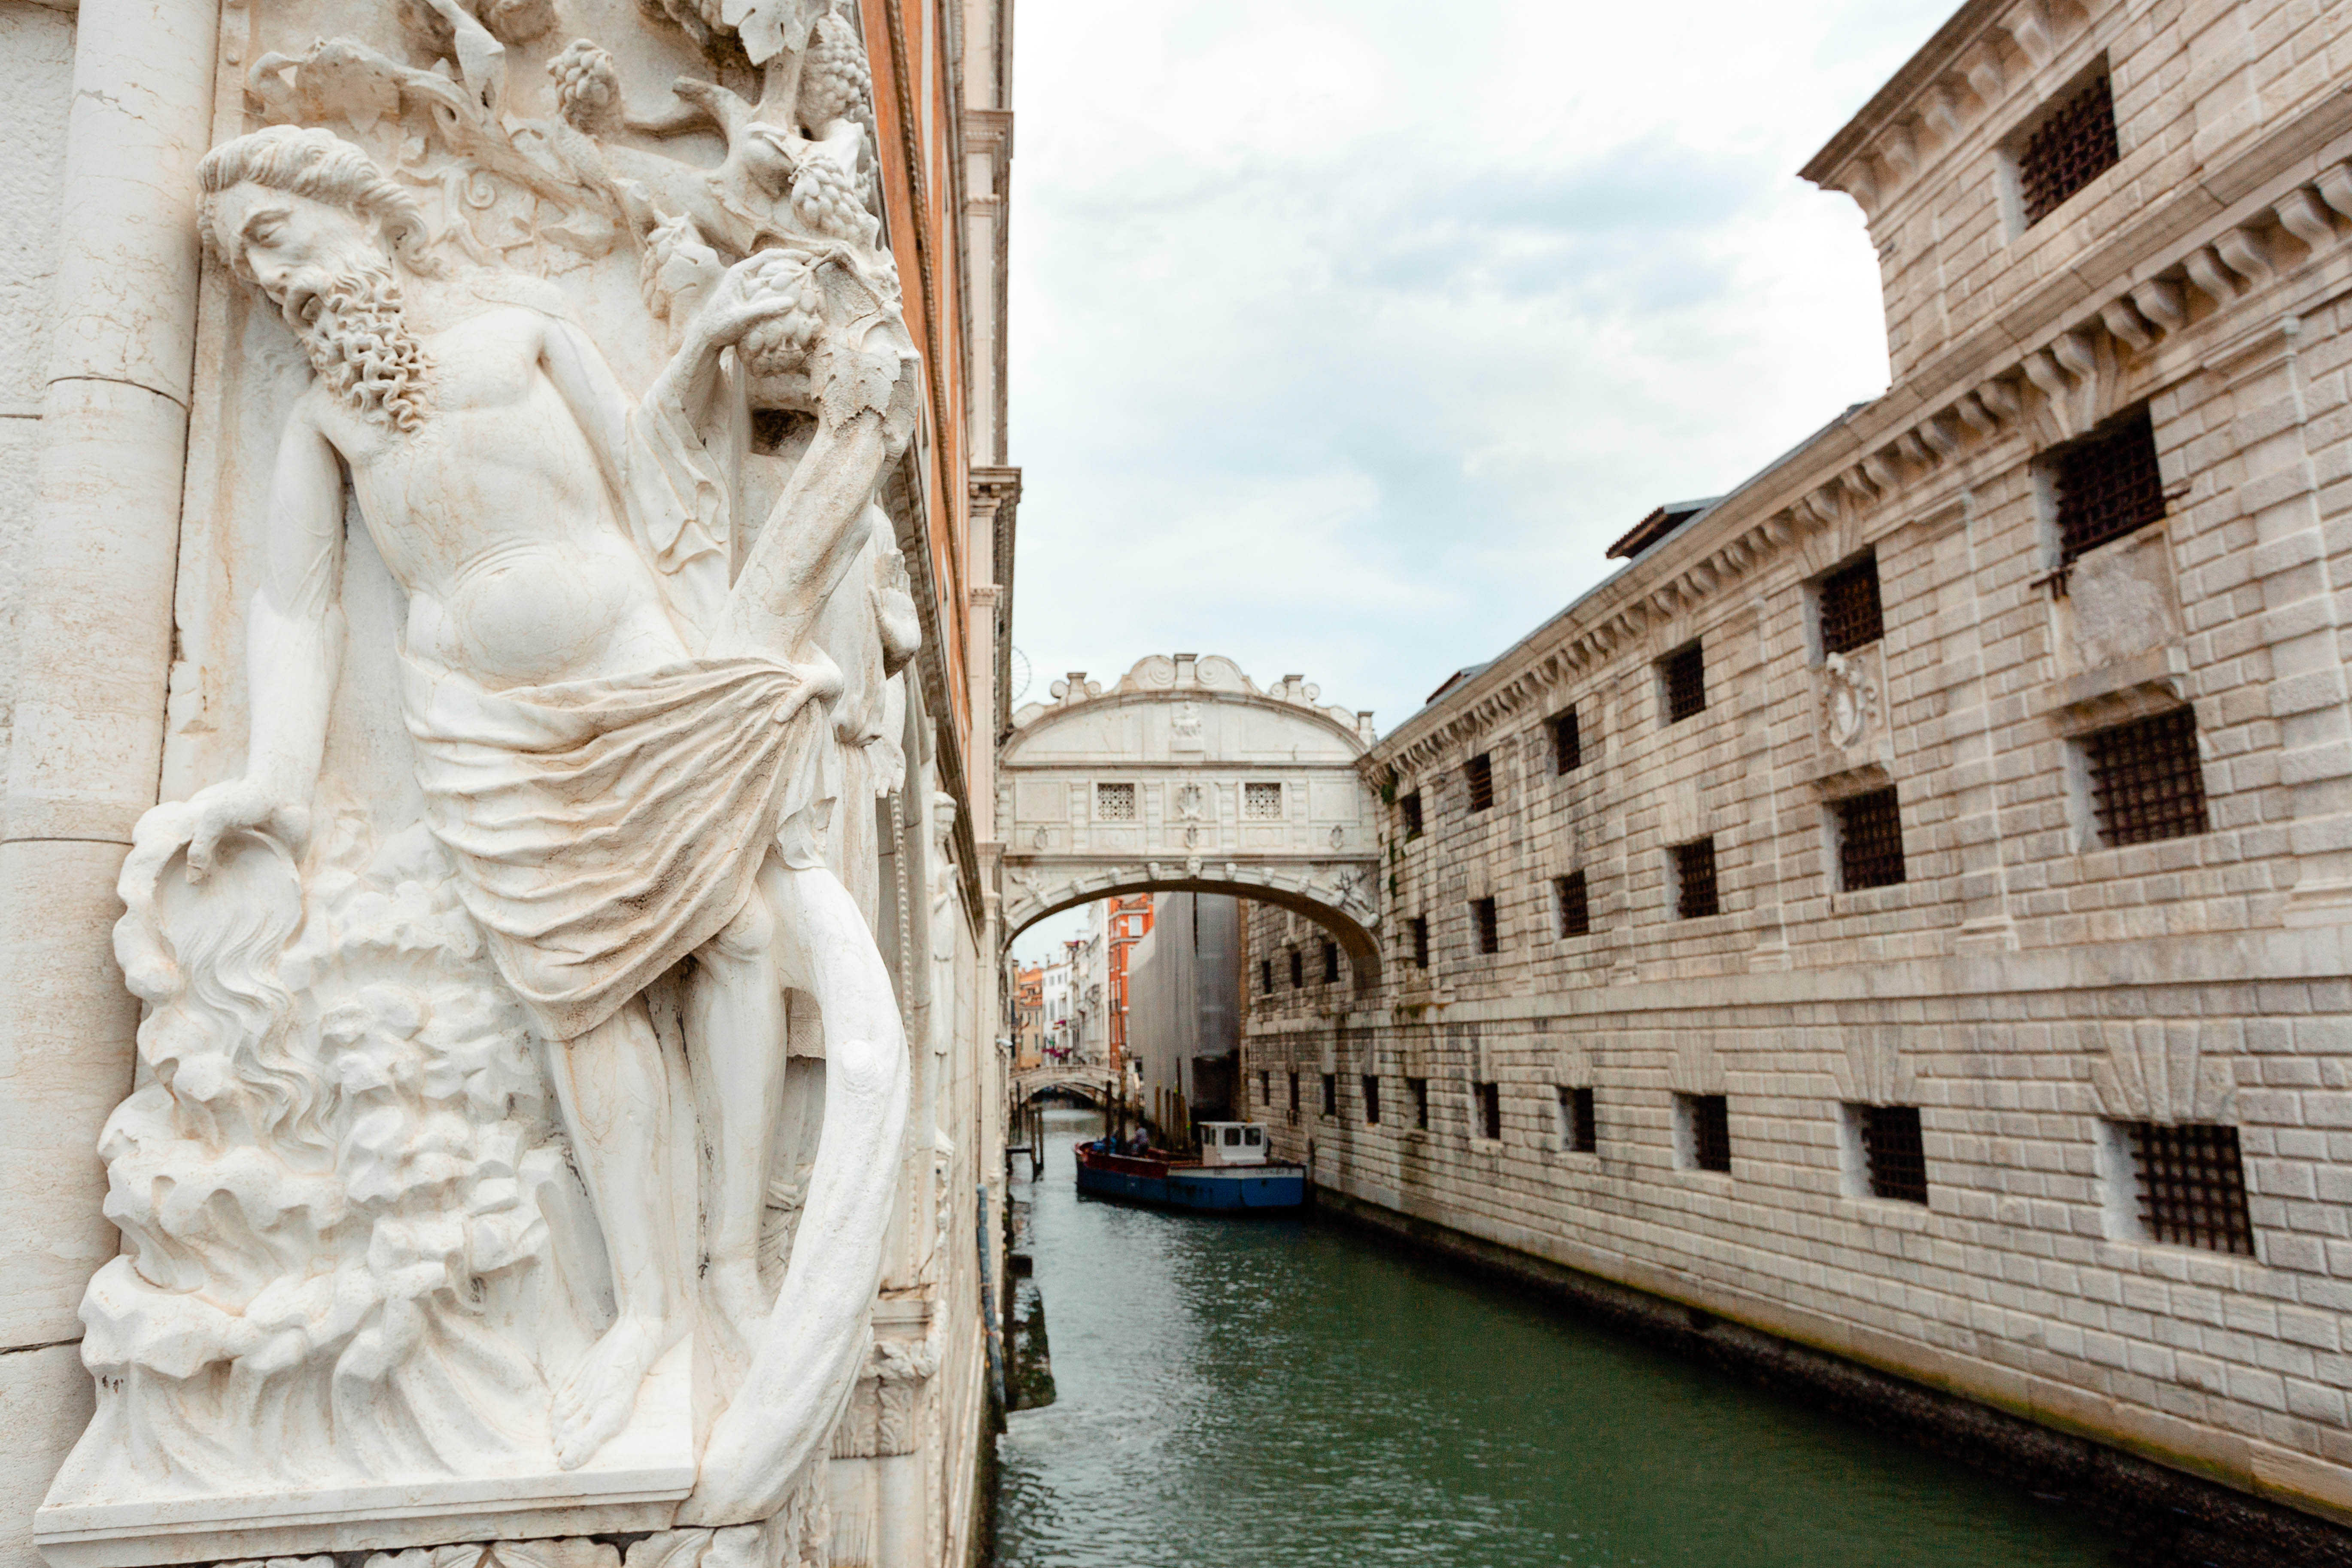 Even in the most touristy of areas, such as the Bridge of Sighs, for example, you can still find unexpected details that most forget to notice. As a tourist, when there's so much to take in and look at, it's easy to lose sight of the details until you remember to zoom in to examine them.